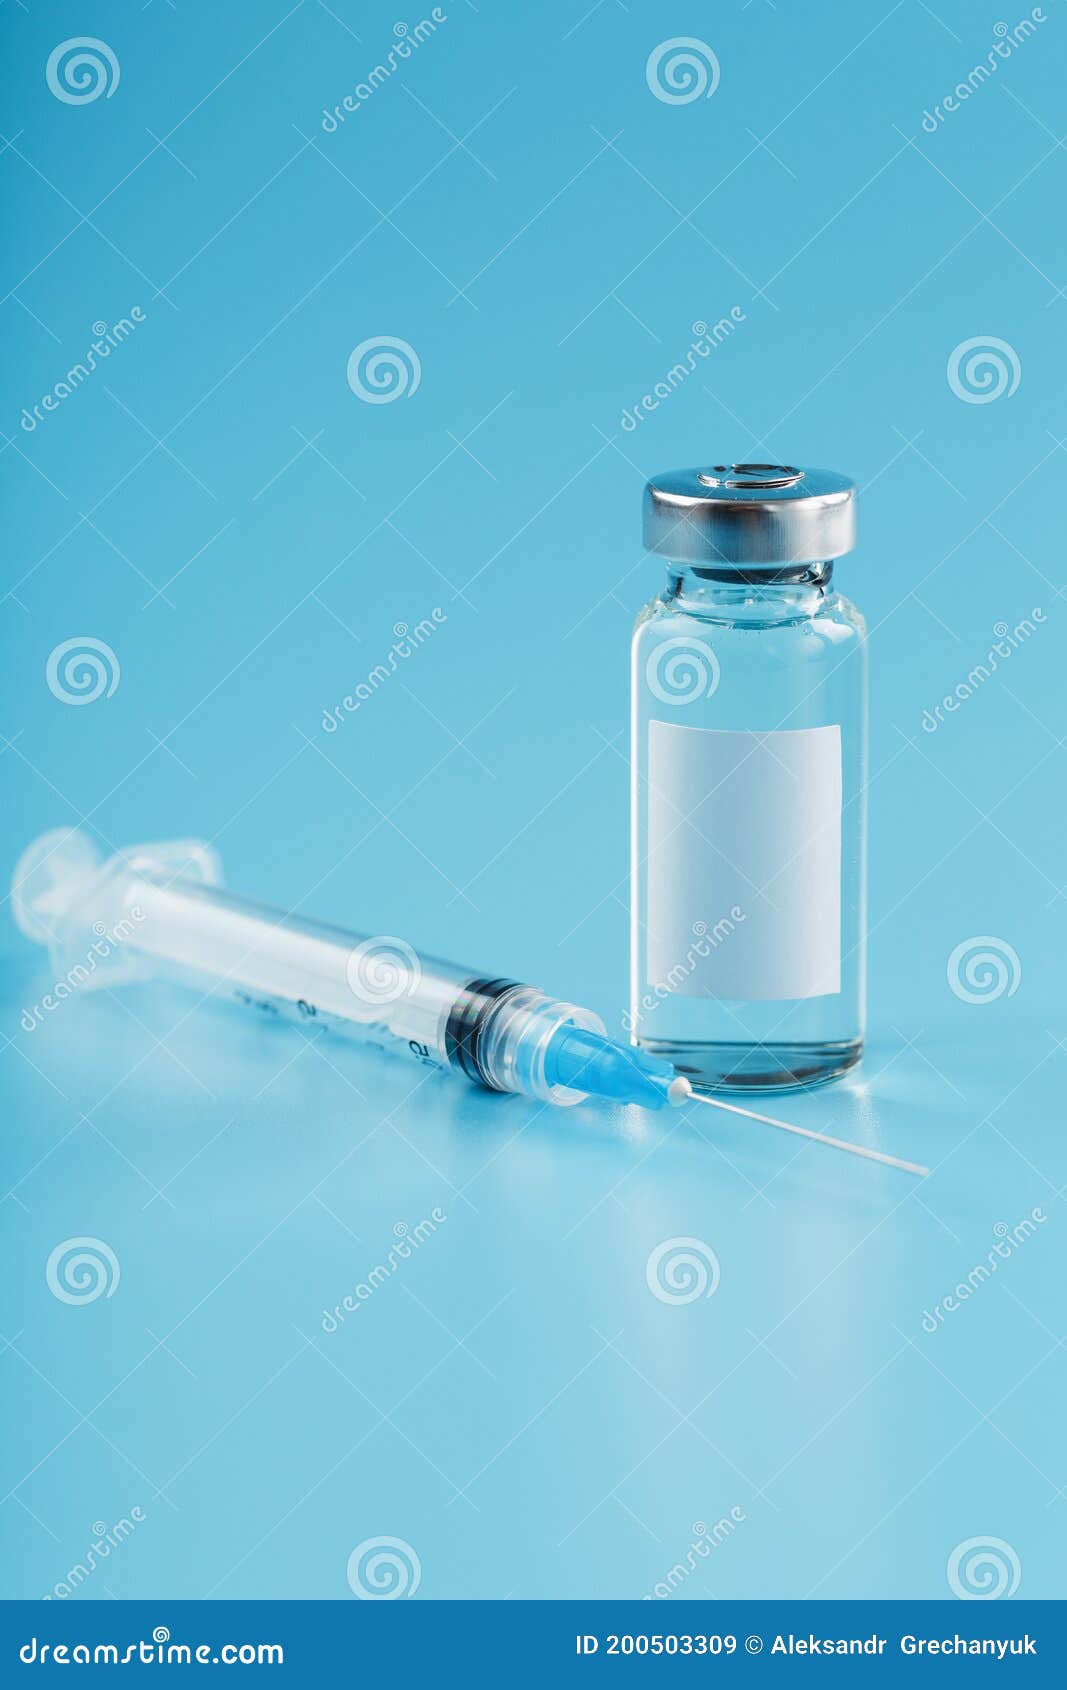 syringe and ampoule with a vaccine against viruses and diseases on a blue background